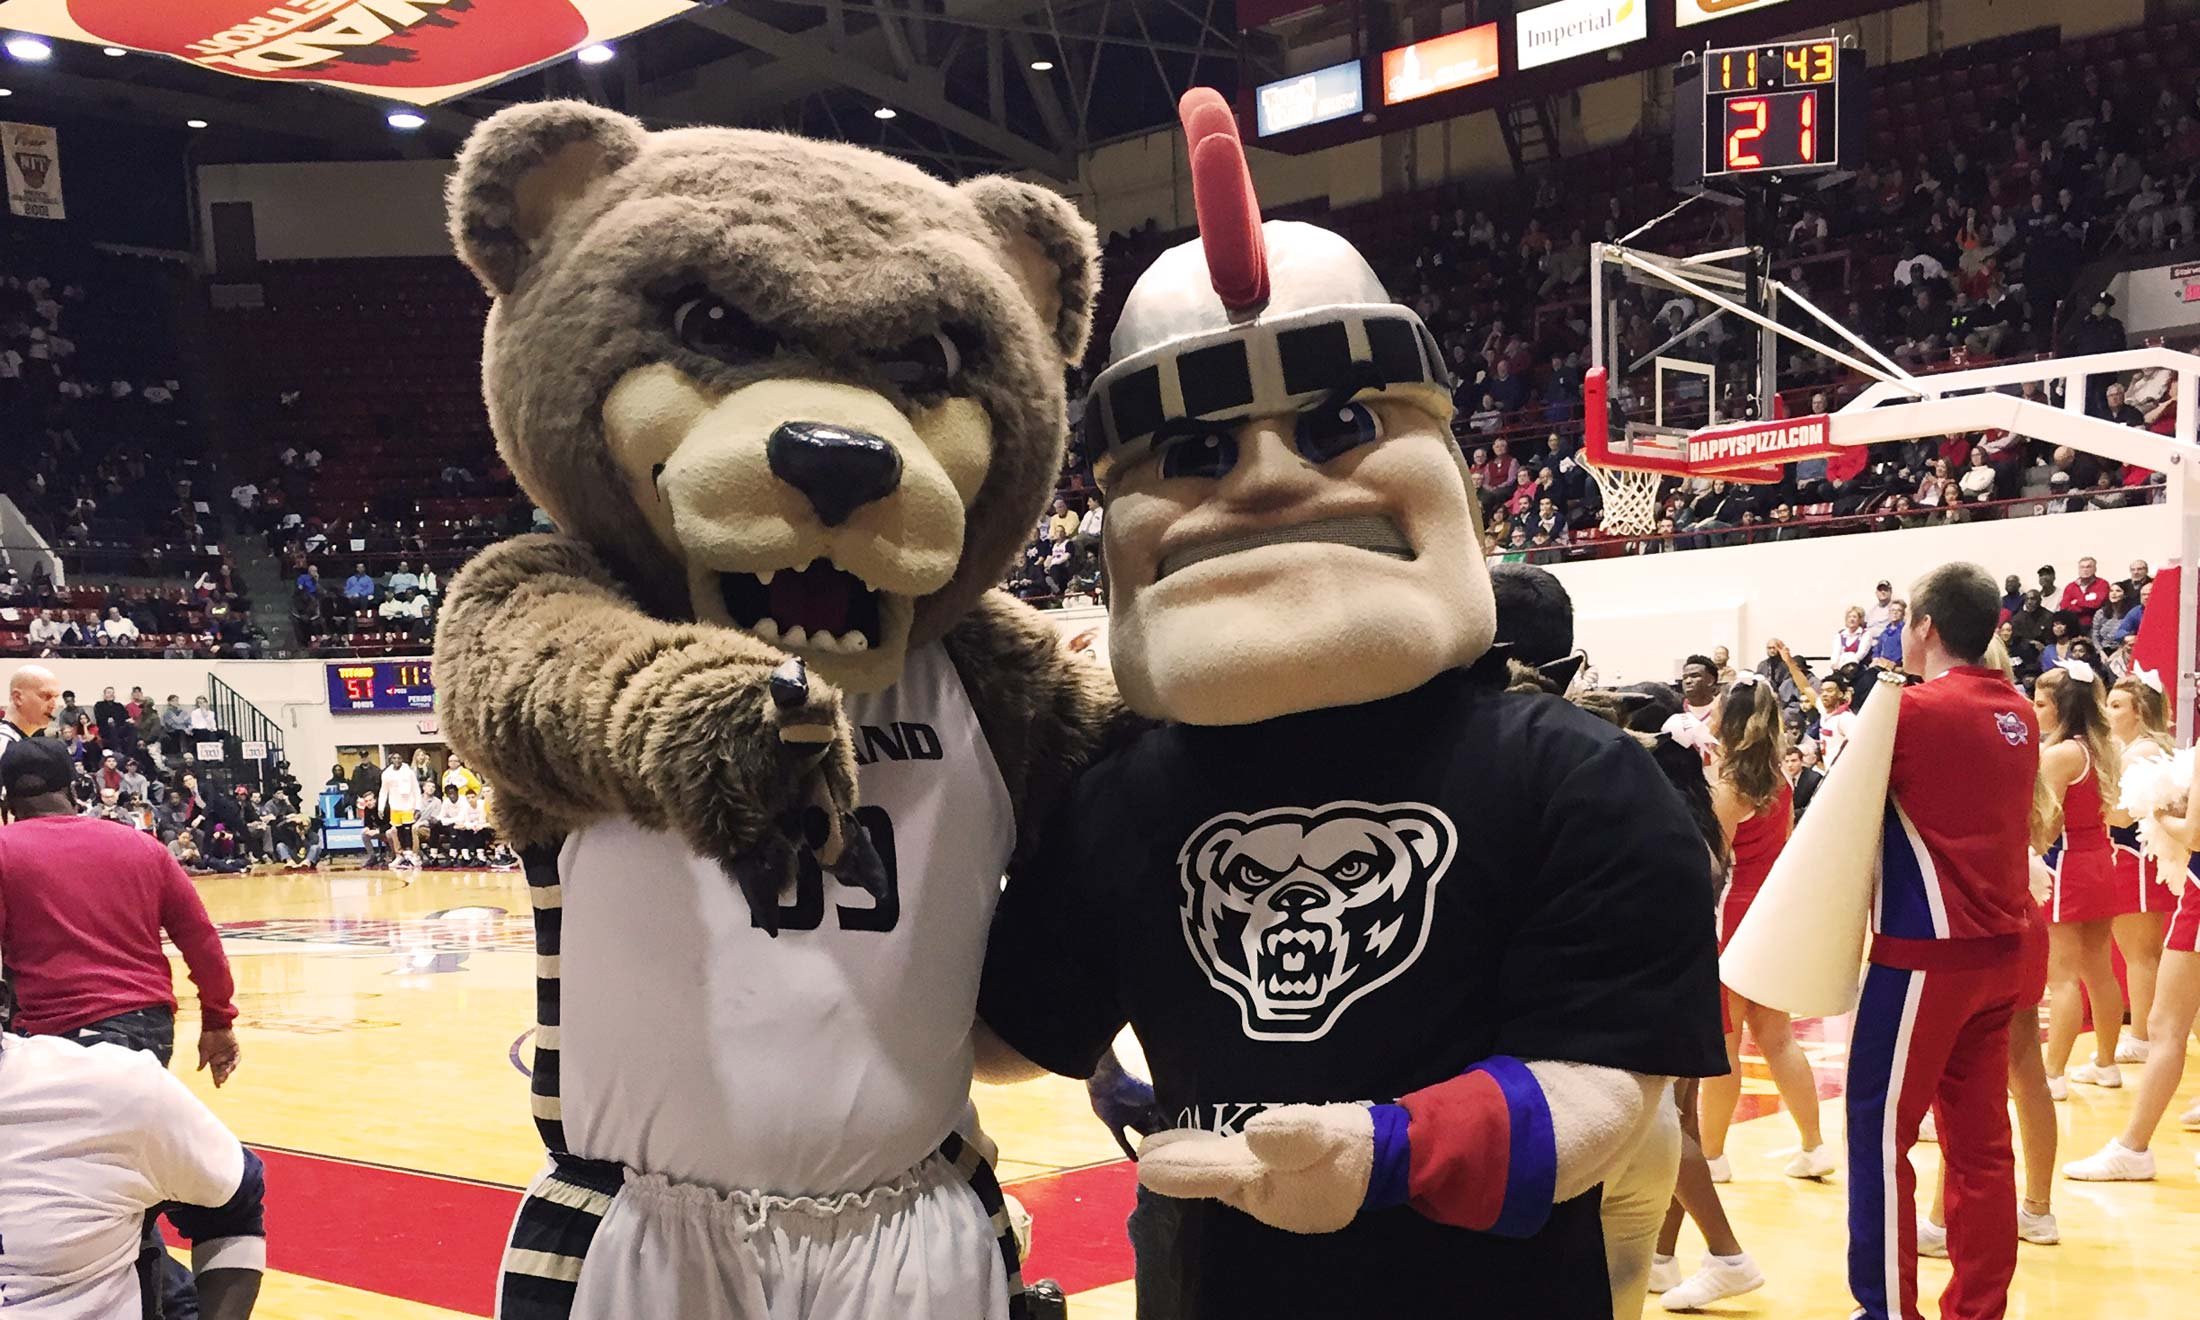 Oakland University's mascot Grizz and Detroit Mercy's mascot Tommy Titan pose together in Calihan Hall. Tommy Titan is wearing an Oakland tshirt.